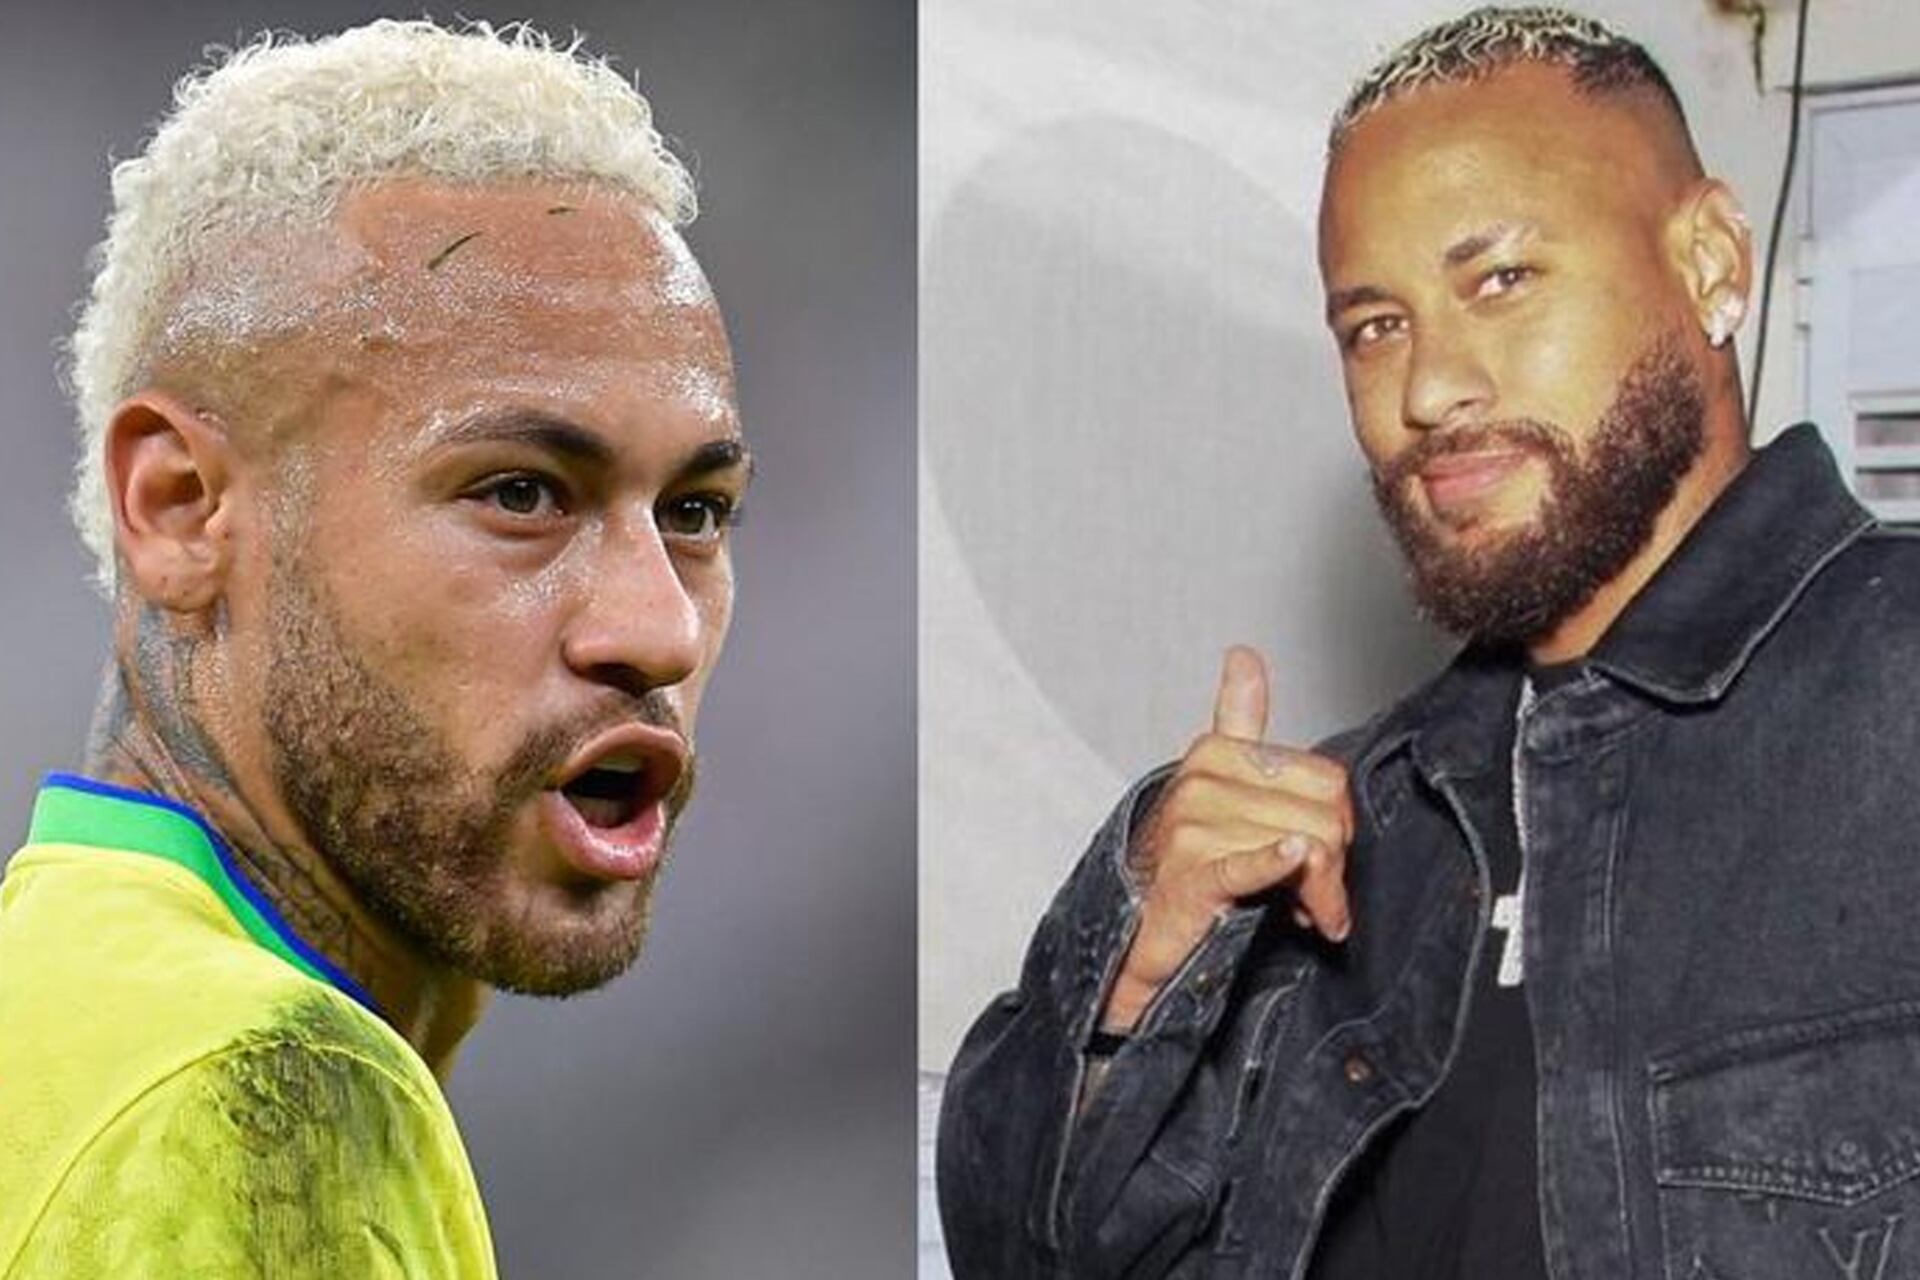  The scandals don't stop, Neymar is in the news again with another controversy